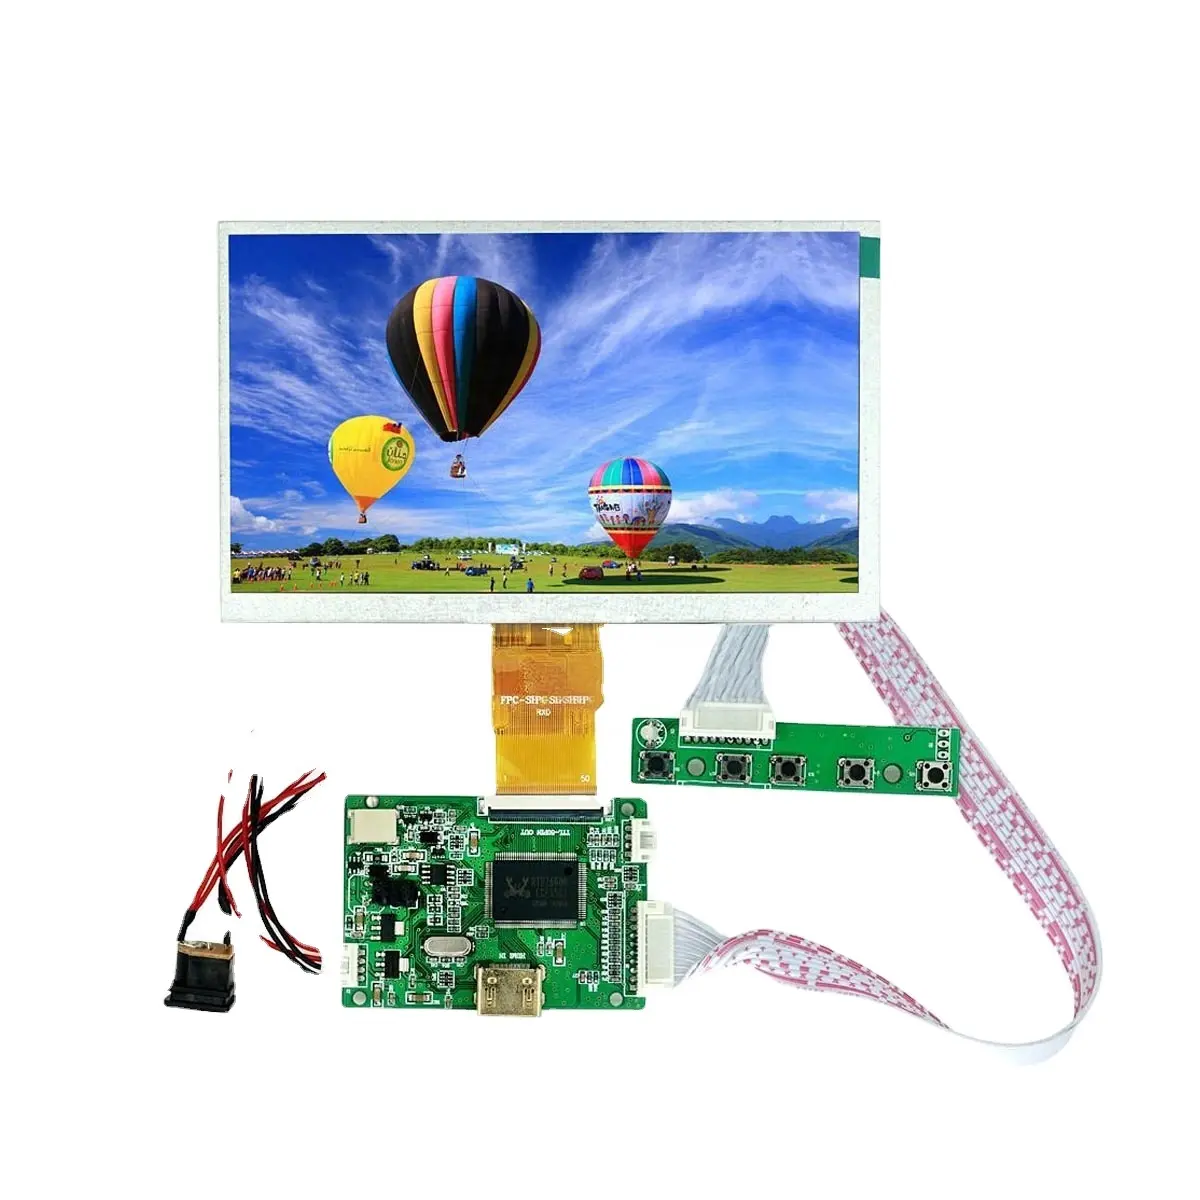 7 inch color lcd screen high quality VGA 1024x600 tft display for brochure card module